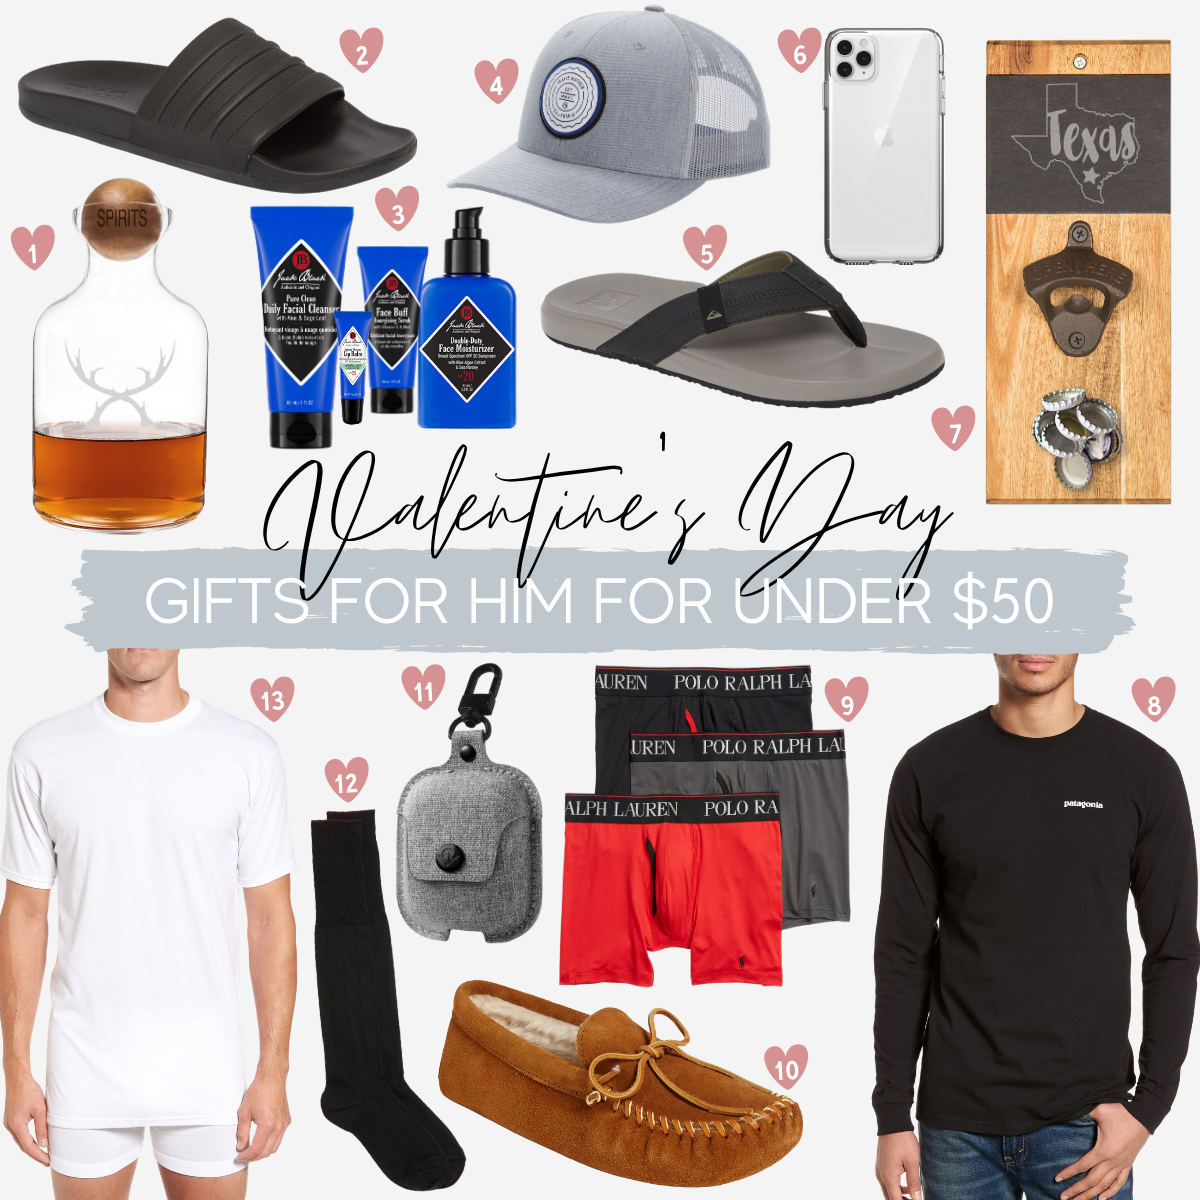 Valentine's Day gifts under $50 by popular Houston life and style blog, Haute and Humid: collage image of a Nordstrom 'Antlers' Glass Decanter & Wood Stopper CATHY'S CONCEPTS, Nordstrom Adilette Cloudfoam Mono Sport Slide ADIDAS, Nordstrom Skin Saviors Set JACK BLACK. Nordstrom Trip L Trucker Hat TRAVISMATHEW, Nordstrom Cushion Bounce Phantom Flip Flop REEF, Nordstrom Presidio Stay Clear iPhone 11/11 Pro/11 Pro Max Phone Case SPECK, Nordstrom My State Wall Bottle Opener CATHY'S CONCEPTS, Nordstrom Responsibili-Tee Long Sleeve T-Shirt PATAGONIA, Nordstrom 4D 3-Pack Boxer Briefs POLO RALPH LAUREN, Nordstrom Suede Moccasin with Faux Fur Lining MINNETONKA, Nordstrom Airsnap AirPod Case TWELVE SOUTH, Nordstrom Over the Calf Wool Dress Socks NORDSTROM MEN'S SHOP, and Nordstrom Regular Fit 4-Pack Supima® Cotton T-Shirts NORDSTROM MEN'S SHOP.